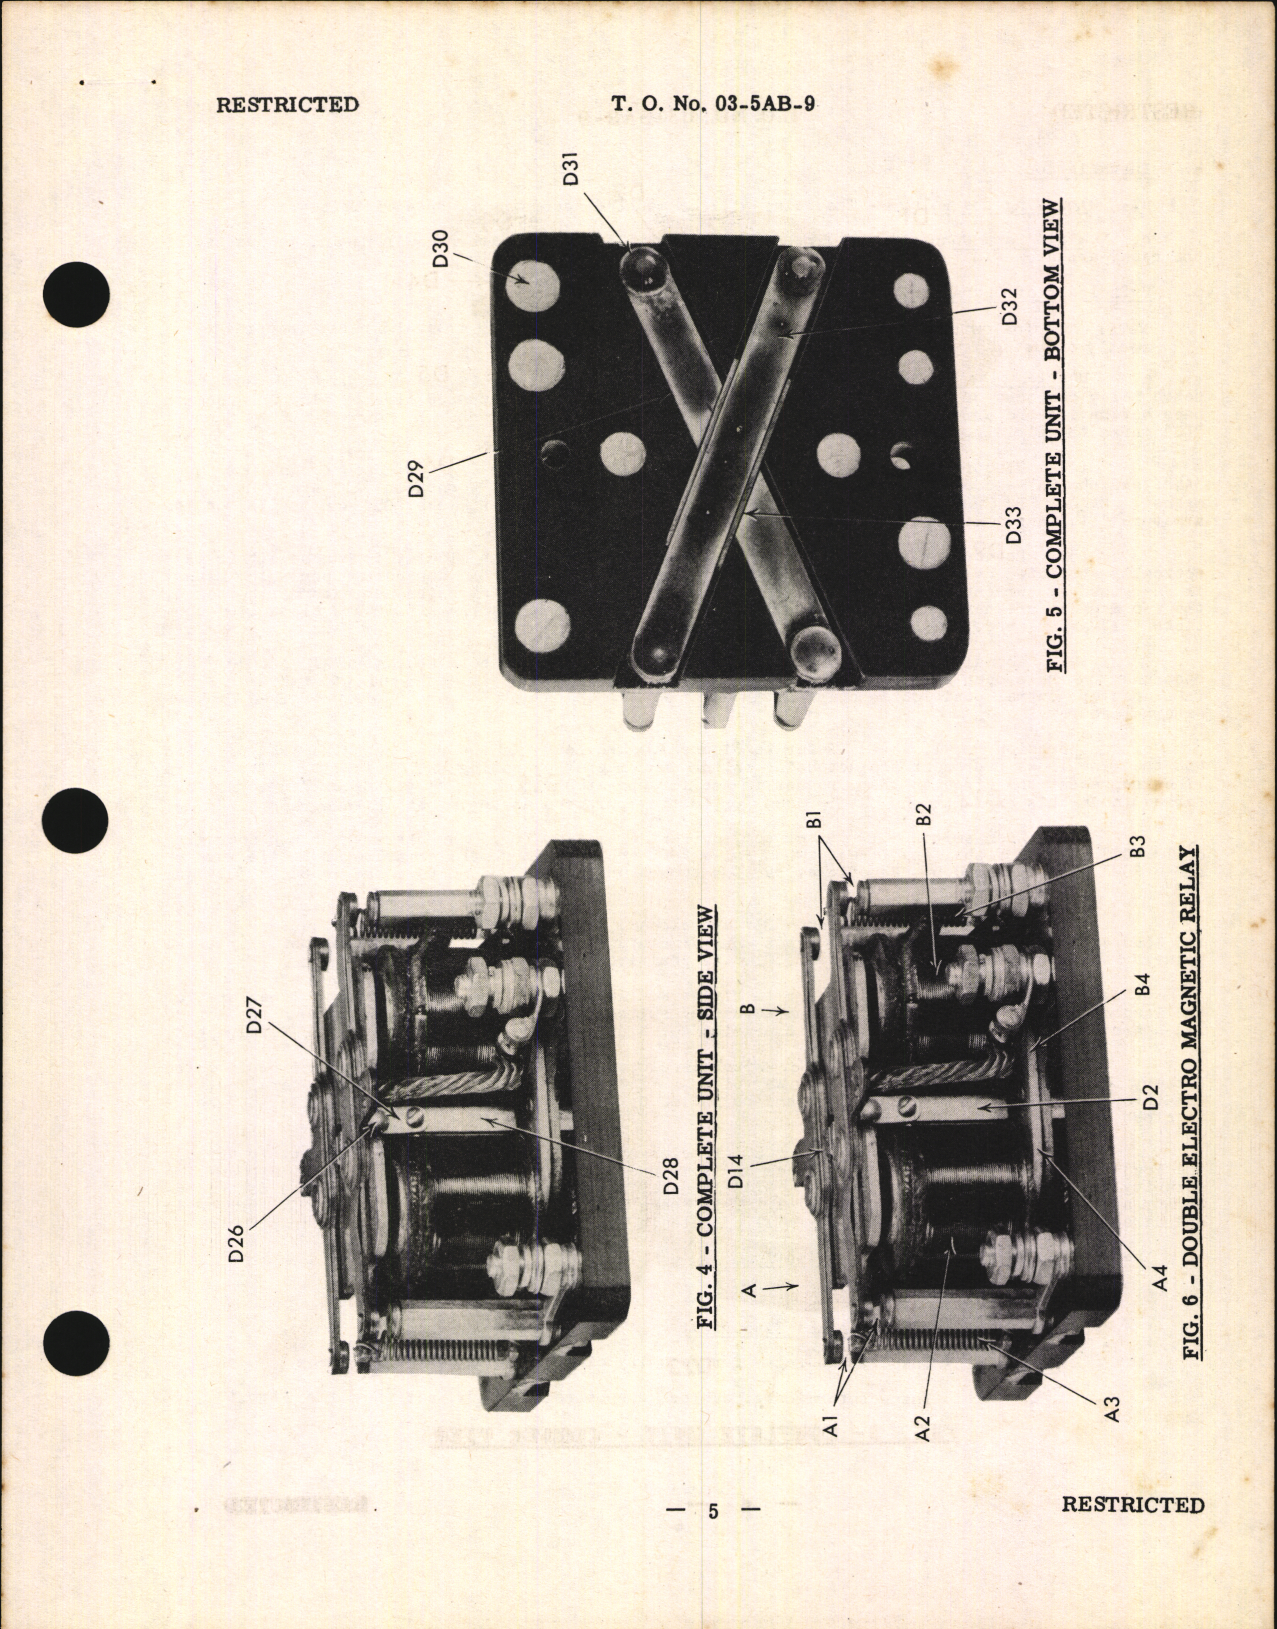 Sample page 7 from AirCorps Library document: Handbook of Instructions with Parts Catalog for Double Relay Type B-3